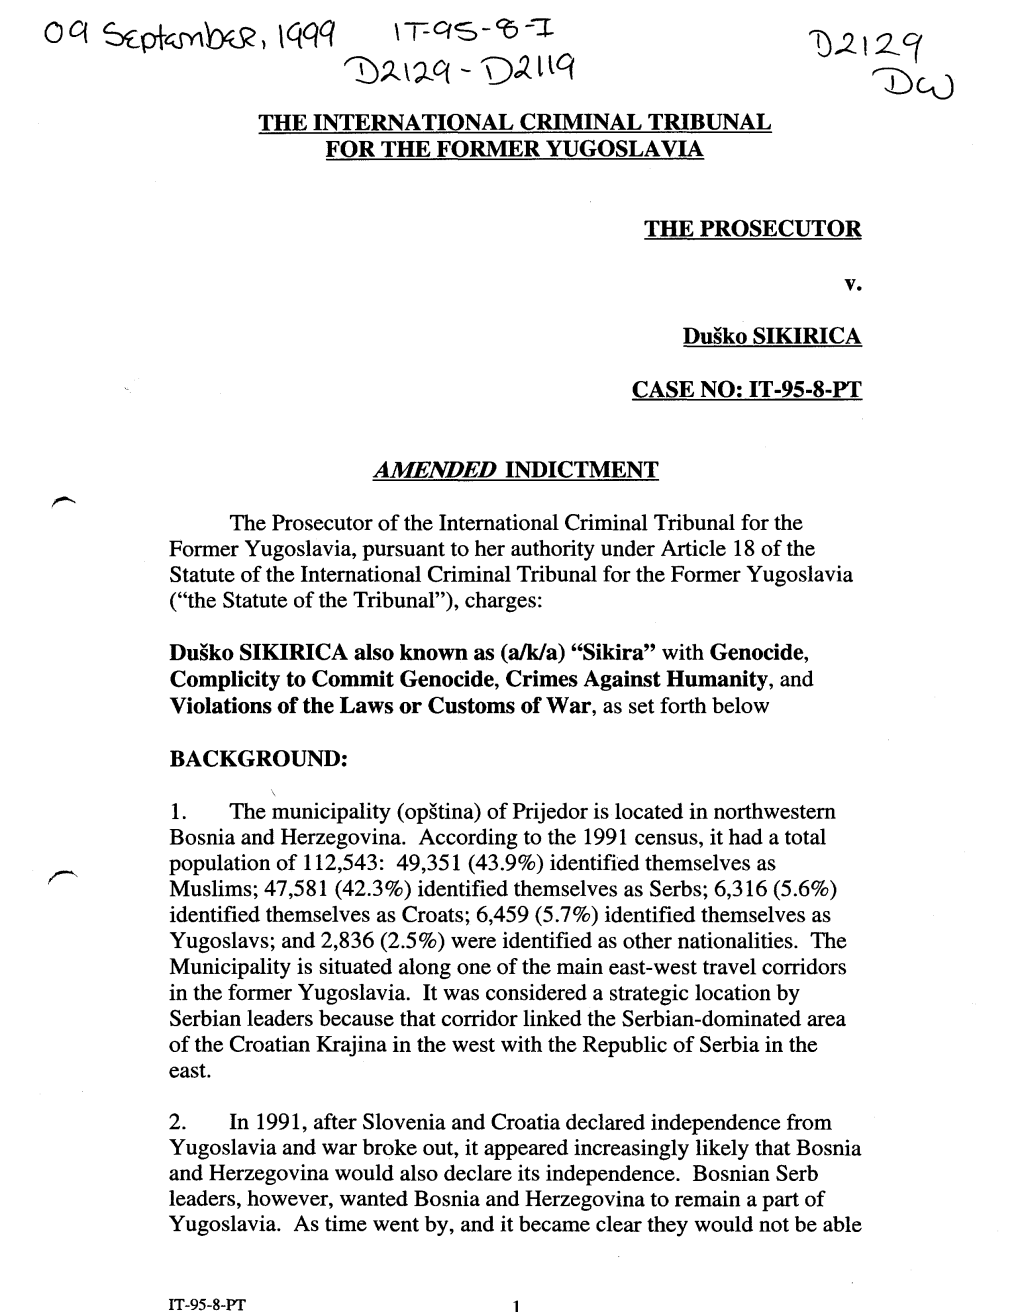 Amended Indictment